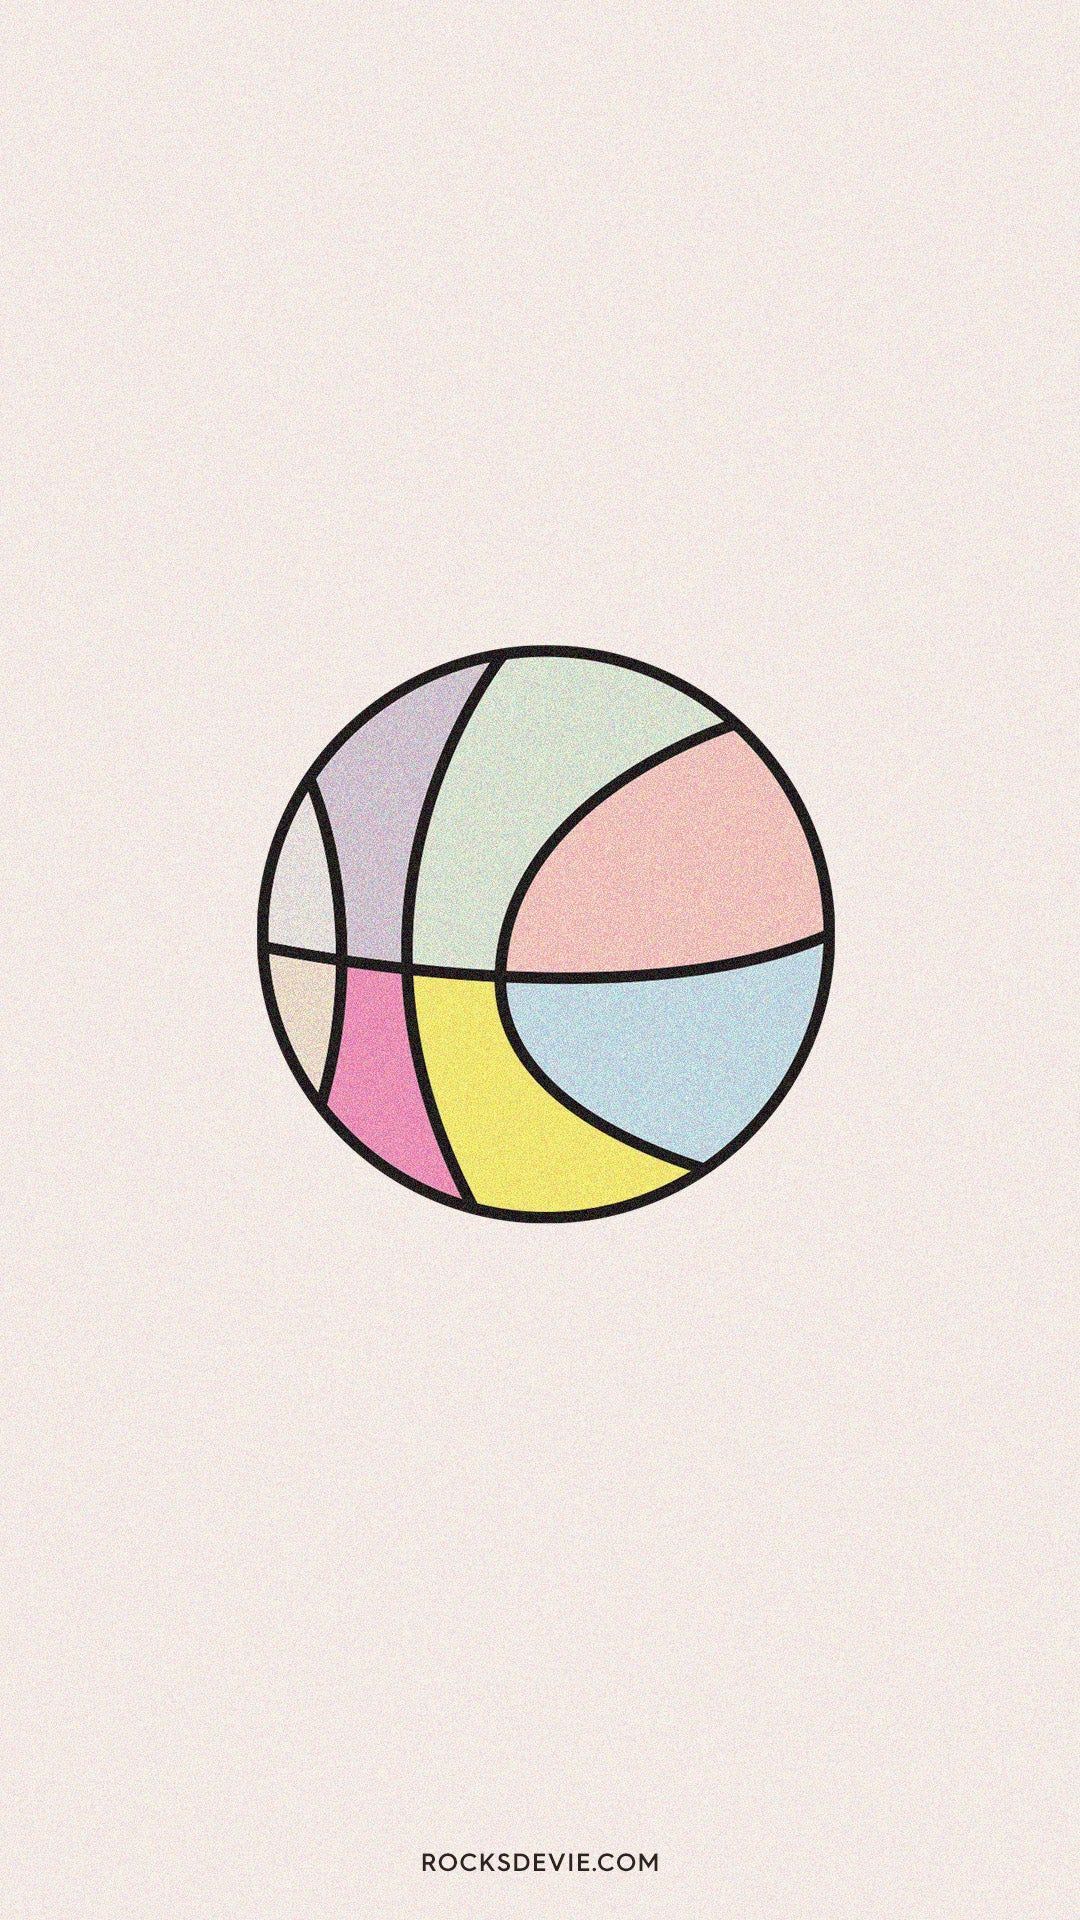 A colorful ball with lines on it - Basketball